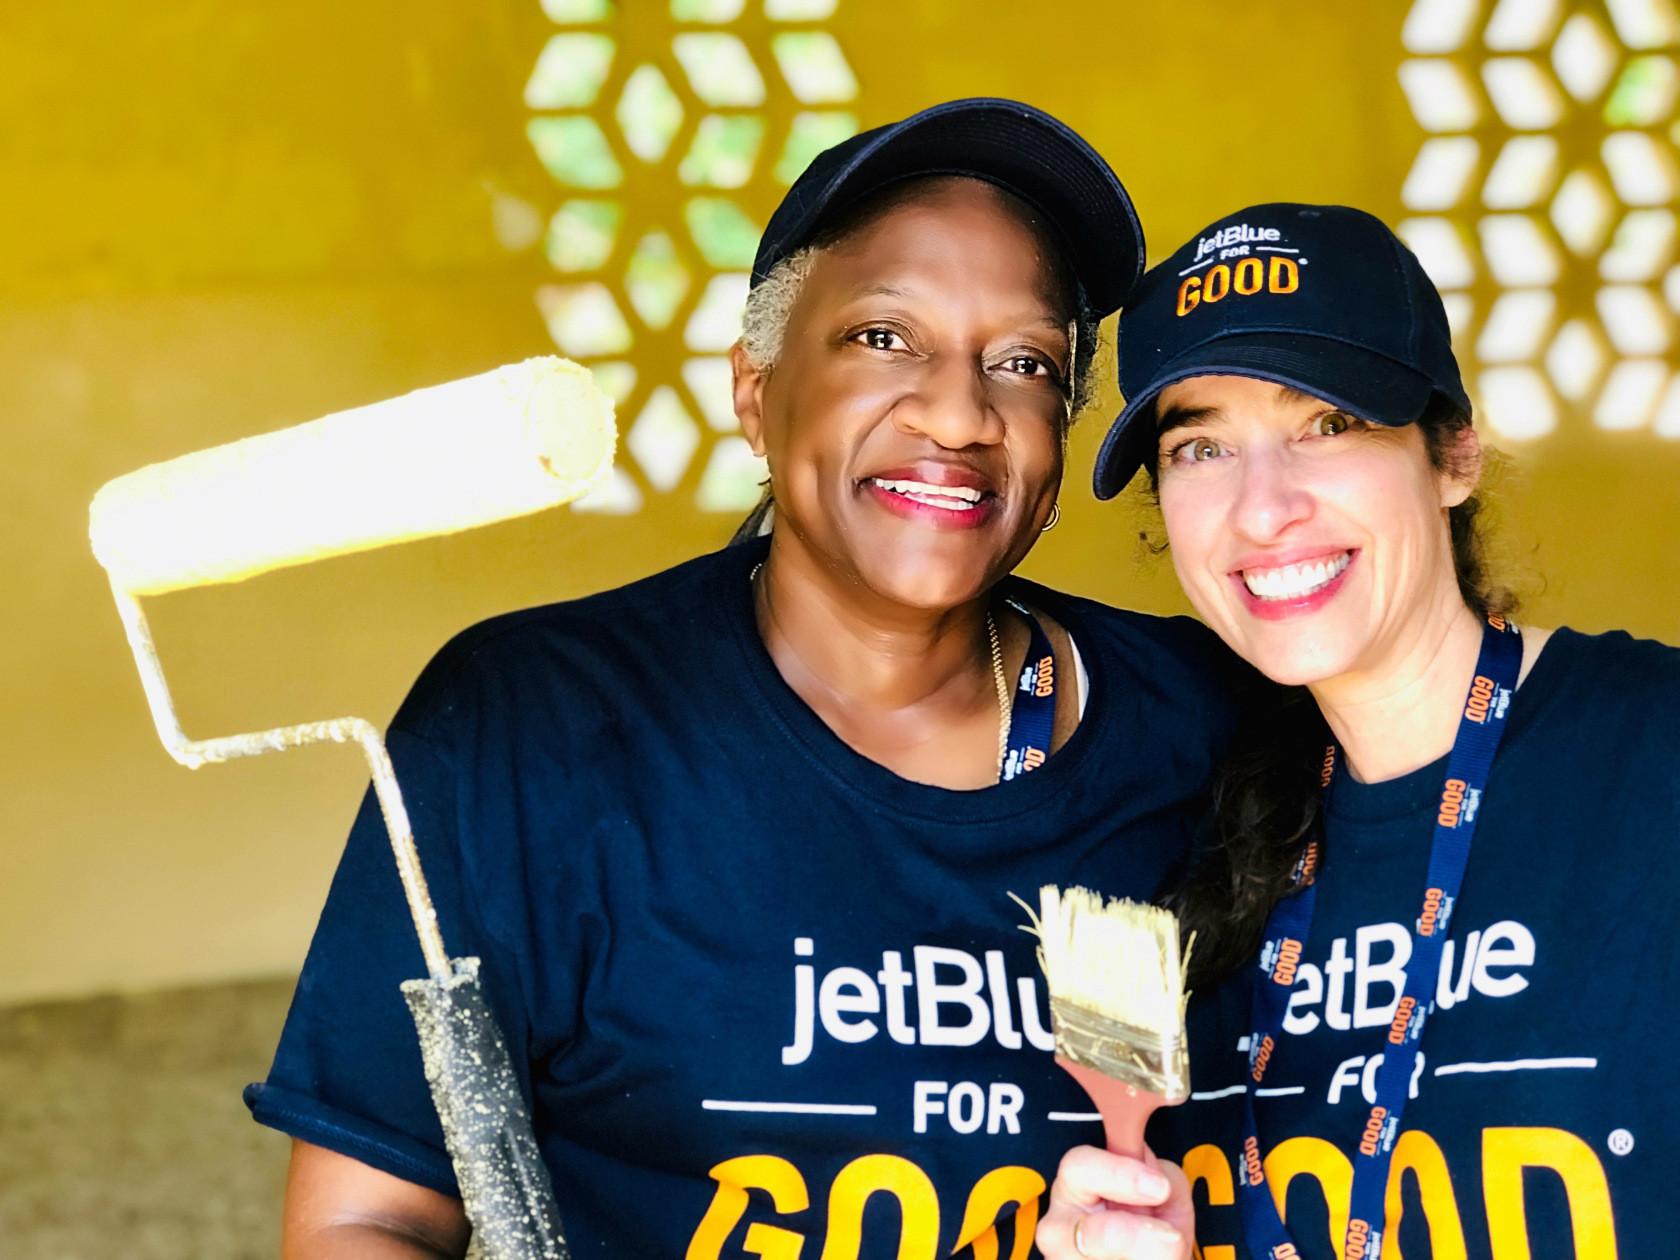 Mattie Kemp (left) and Maria Takacs of Pennfield School take a quick break for a photo while painting the interior of a classroom in the Dominican Republic. Ms. Takacs won a service trip through a JetBlue for Good essay contest, and took Ms. Kemp along with her.